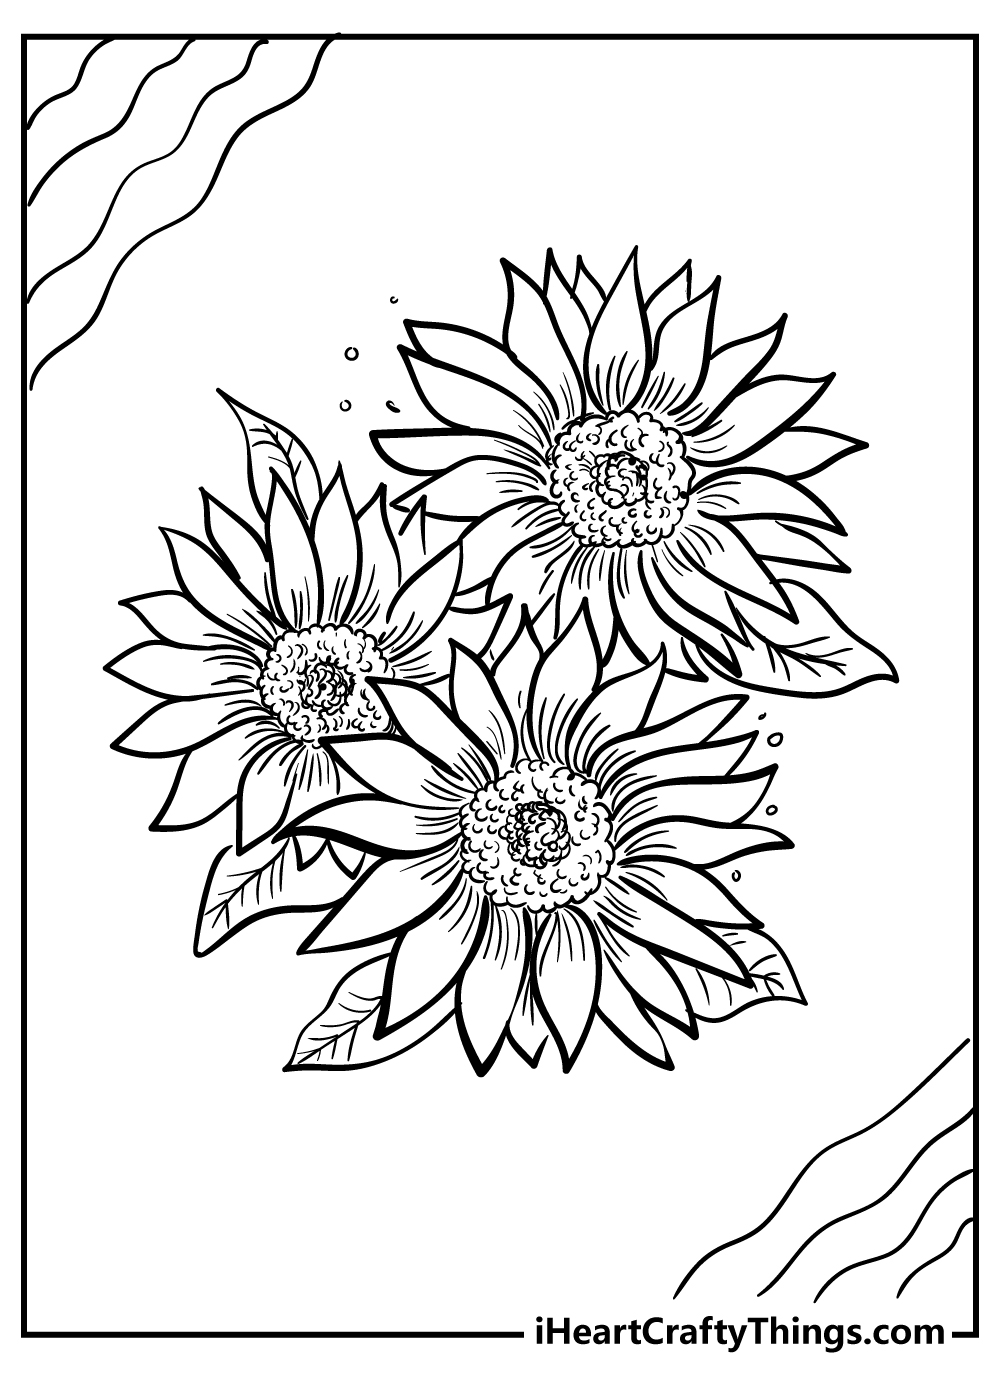 Sunflower coloring pages free printable